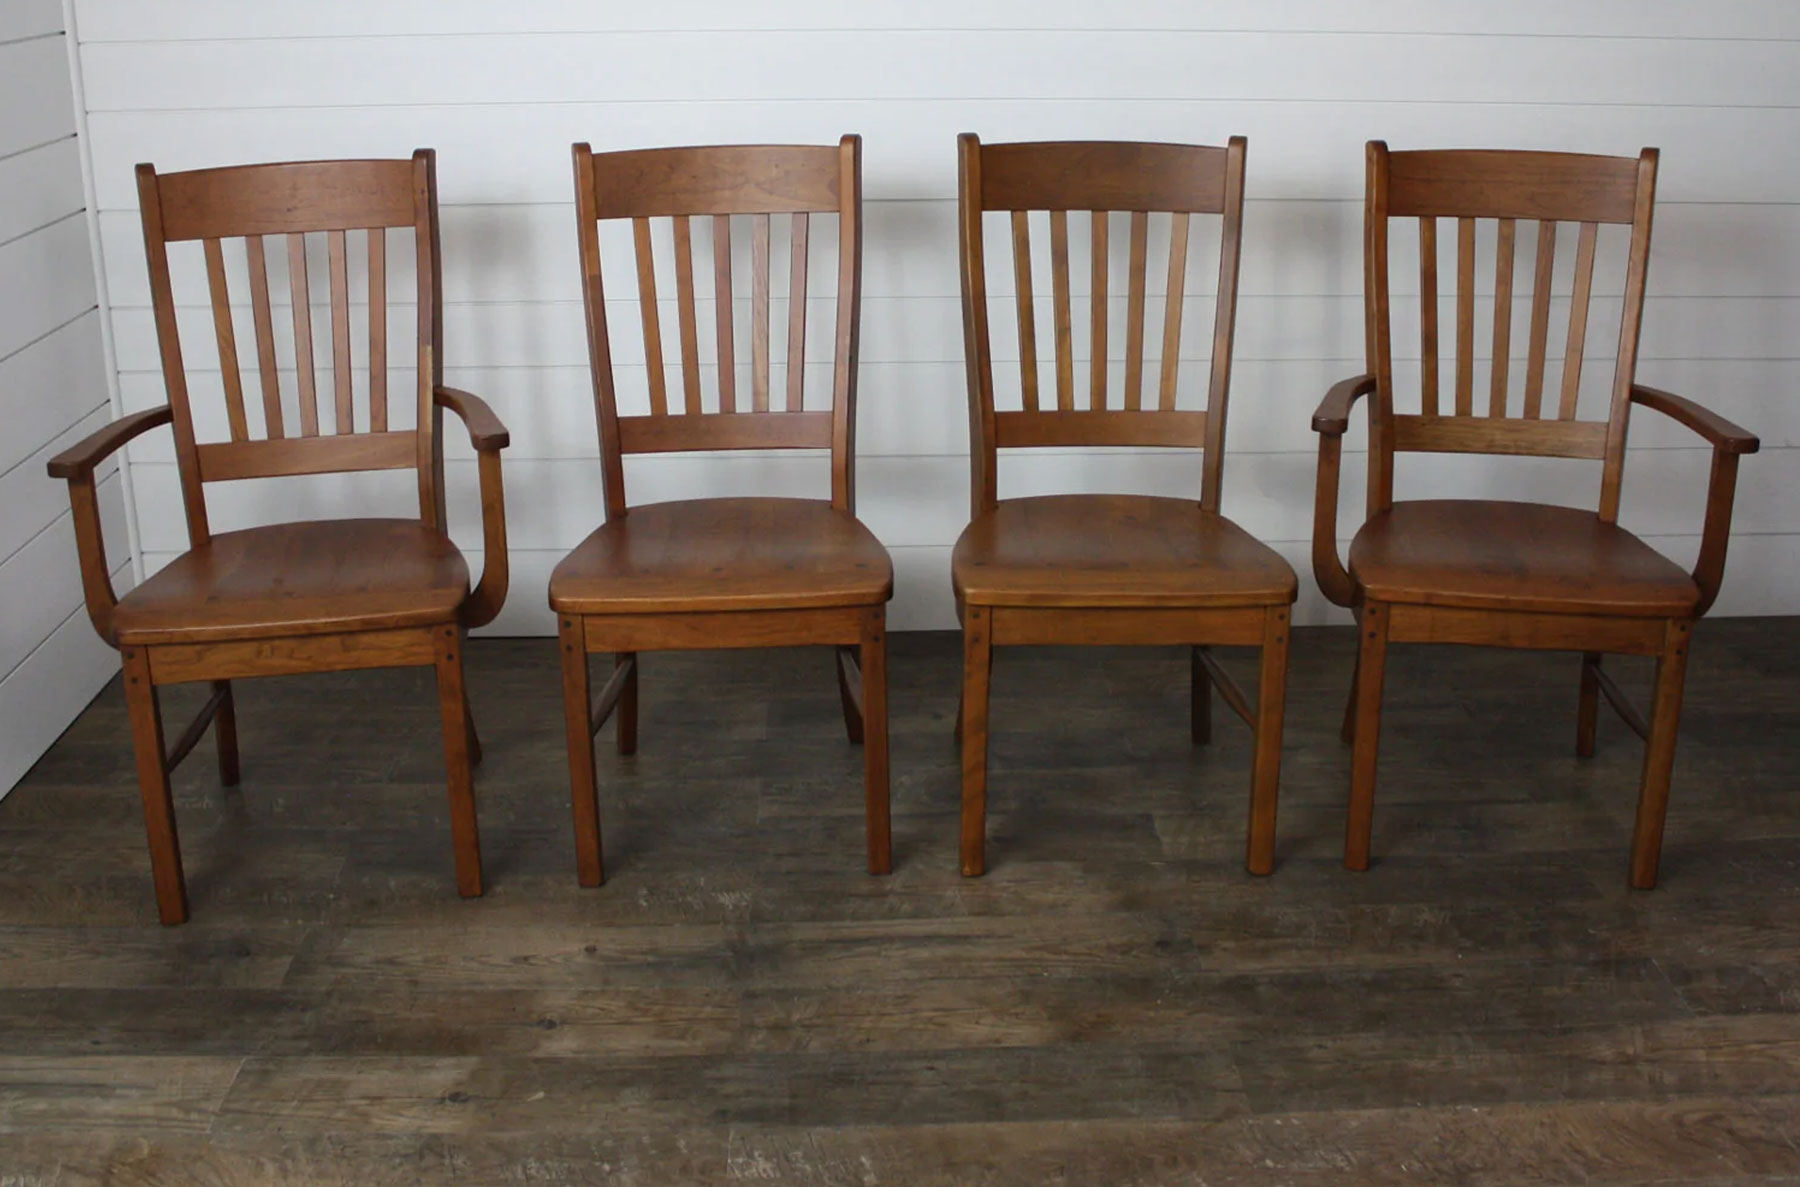 (4) Frontier Dining Chairs in Rustic Cherry